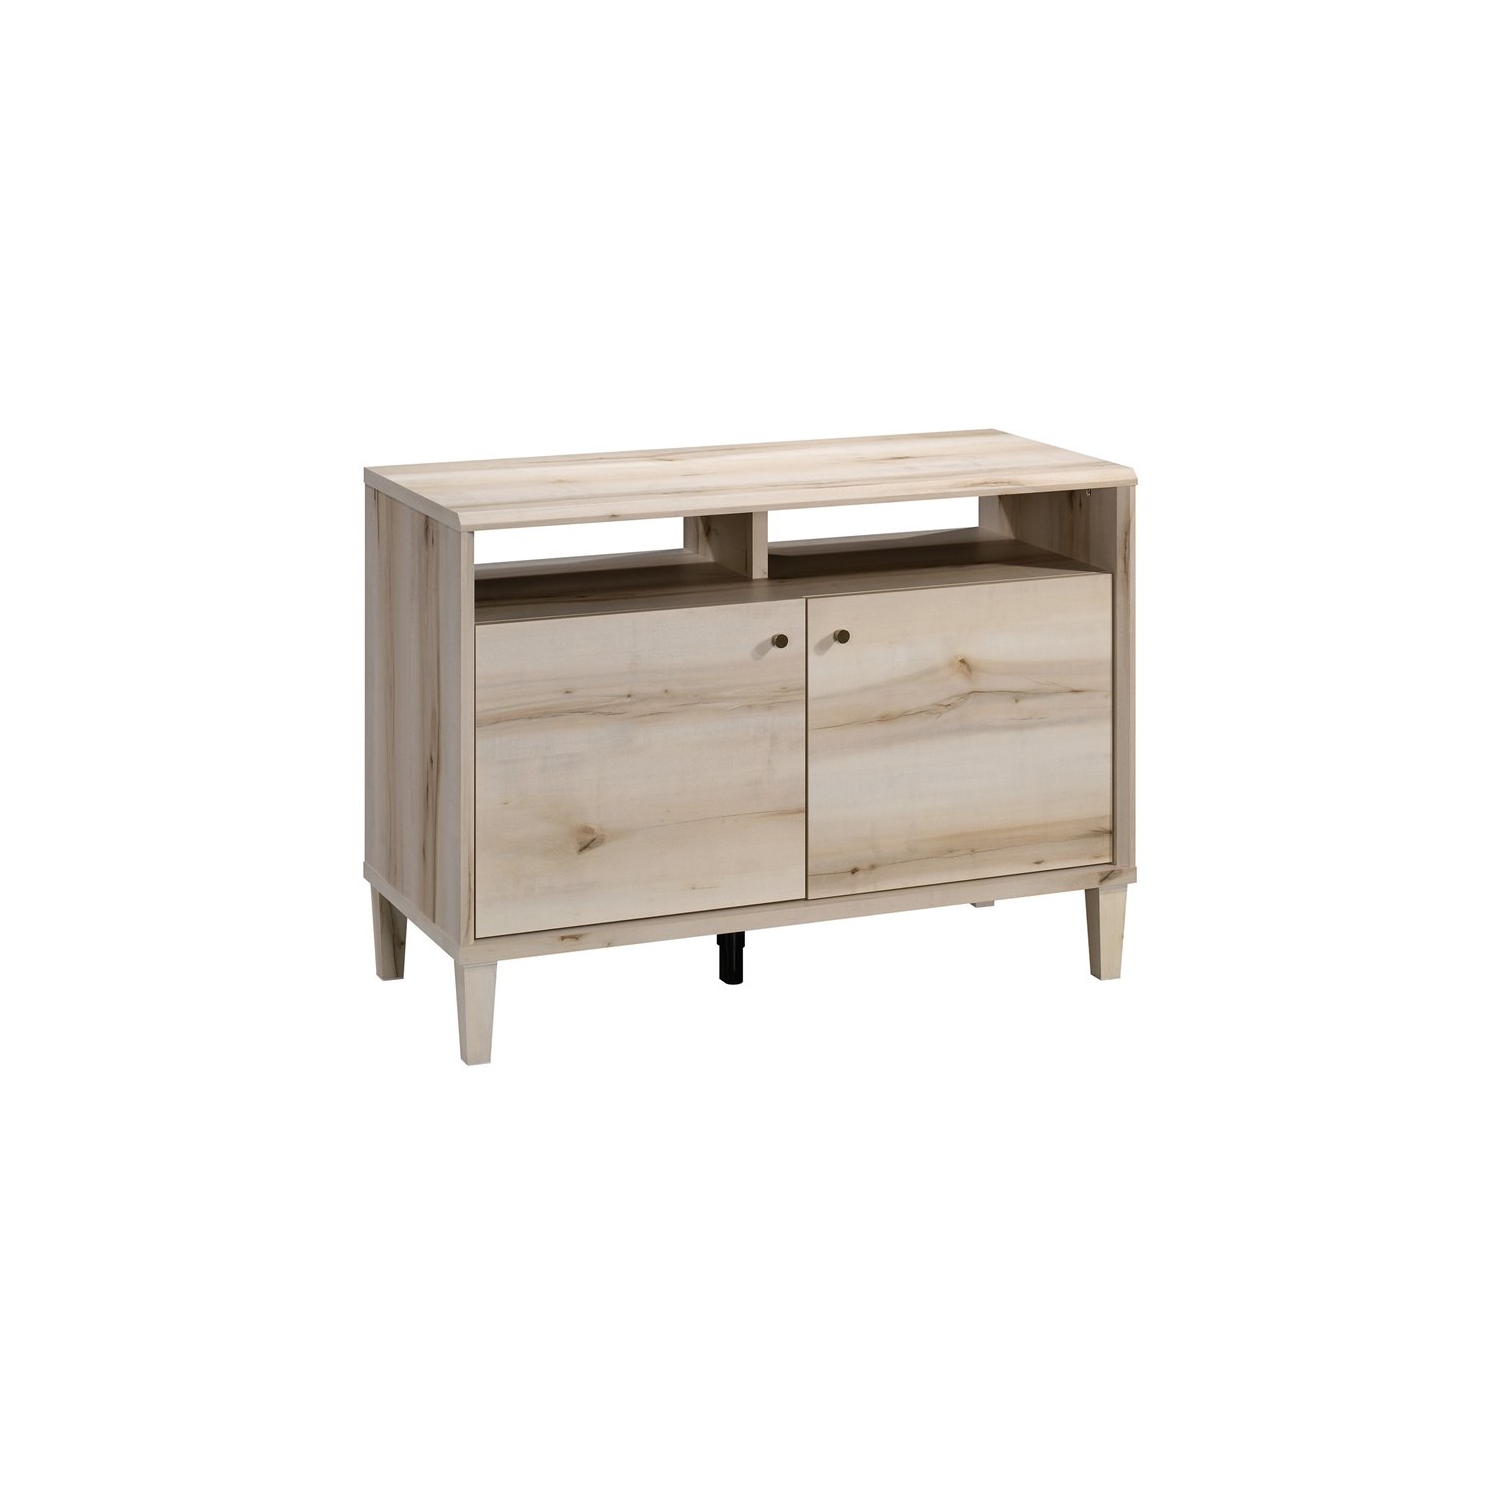 Sauder Willow Place Engineered Wood TV Console for TVs Upto 47" in Pacific Maple